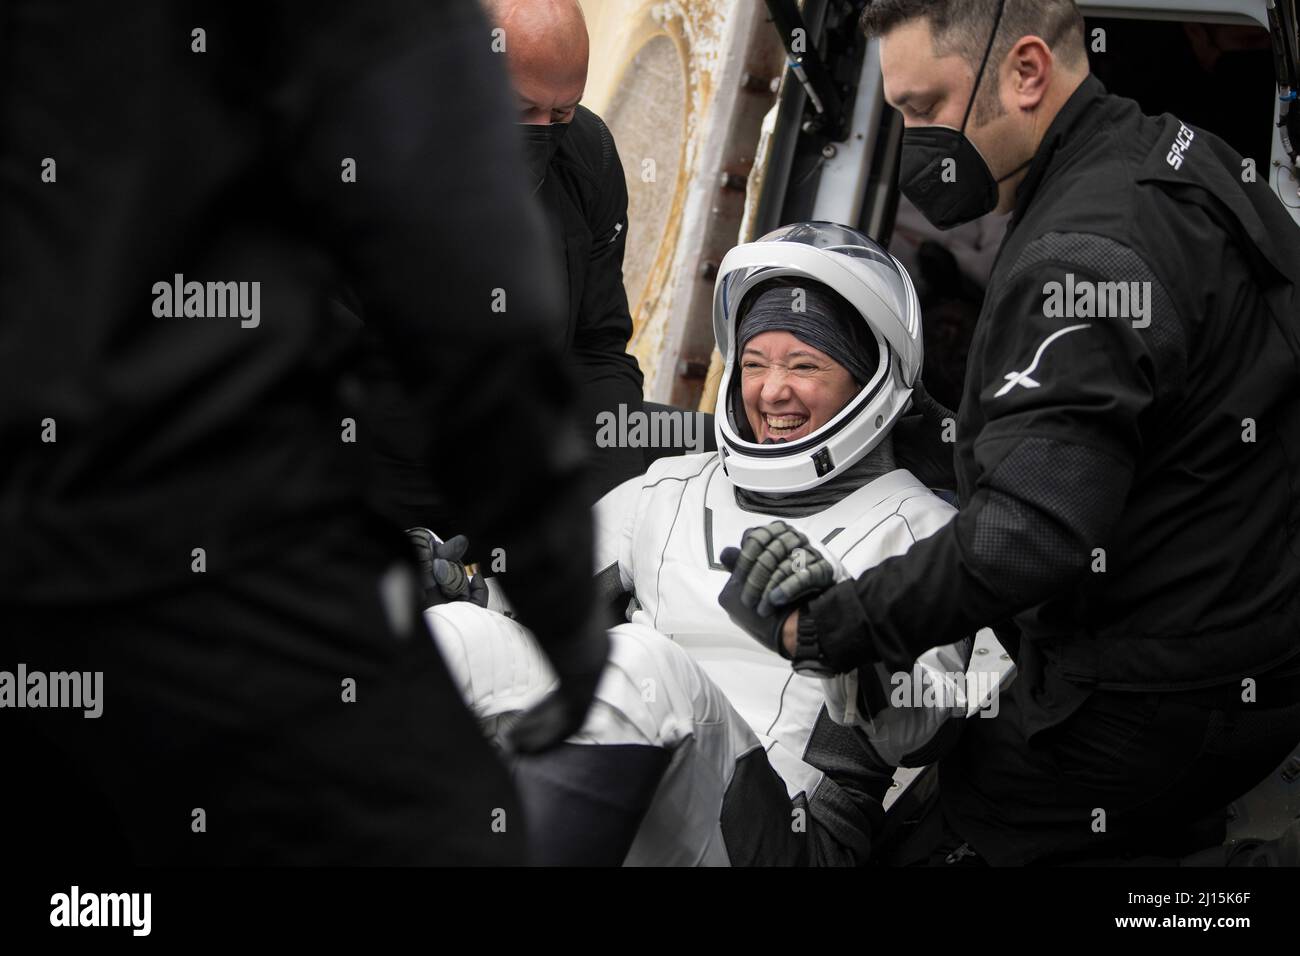 NASA astronaut Megan McArthur is helped out of the SpaceX Crew Dragon Endeavour spacecraft onboard the SpaceX GO Navigator recovery ship after she and NASA astronaut Shane Kimbrough, Japan Aerospace Exploration Agency (JAXA) astronaut Aki Hoshide, and ESA (European Space Agency) astronaut Thomas Pesquet landed in the Gulf of Mexico off the coast of Pensacola, Florida, Monday, Nov. 8, 2021. NASA’s SpaceX Crew-2 mission is the second operational mission of the SpaceX Crew Dragon spacecraft and Falcon 9 rocket to the International Space Station as part of the agency’s Commercial Crew Program. Pho Stock Photo